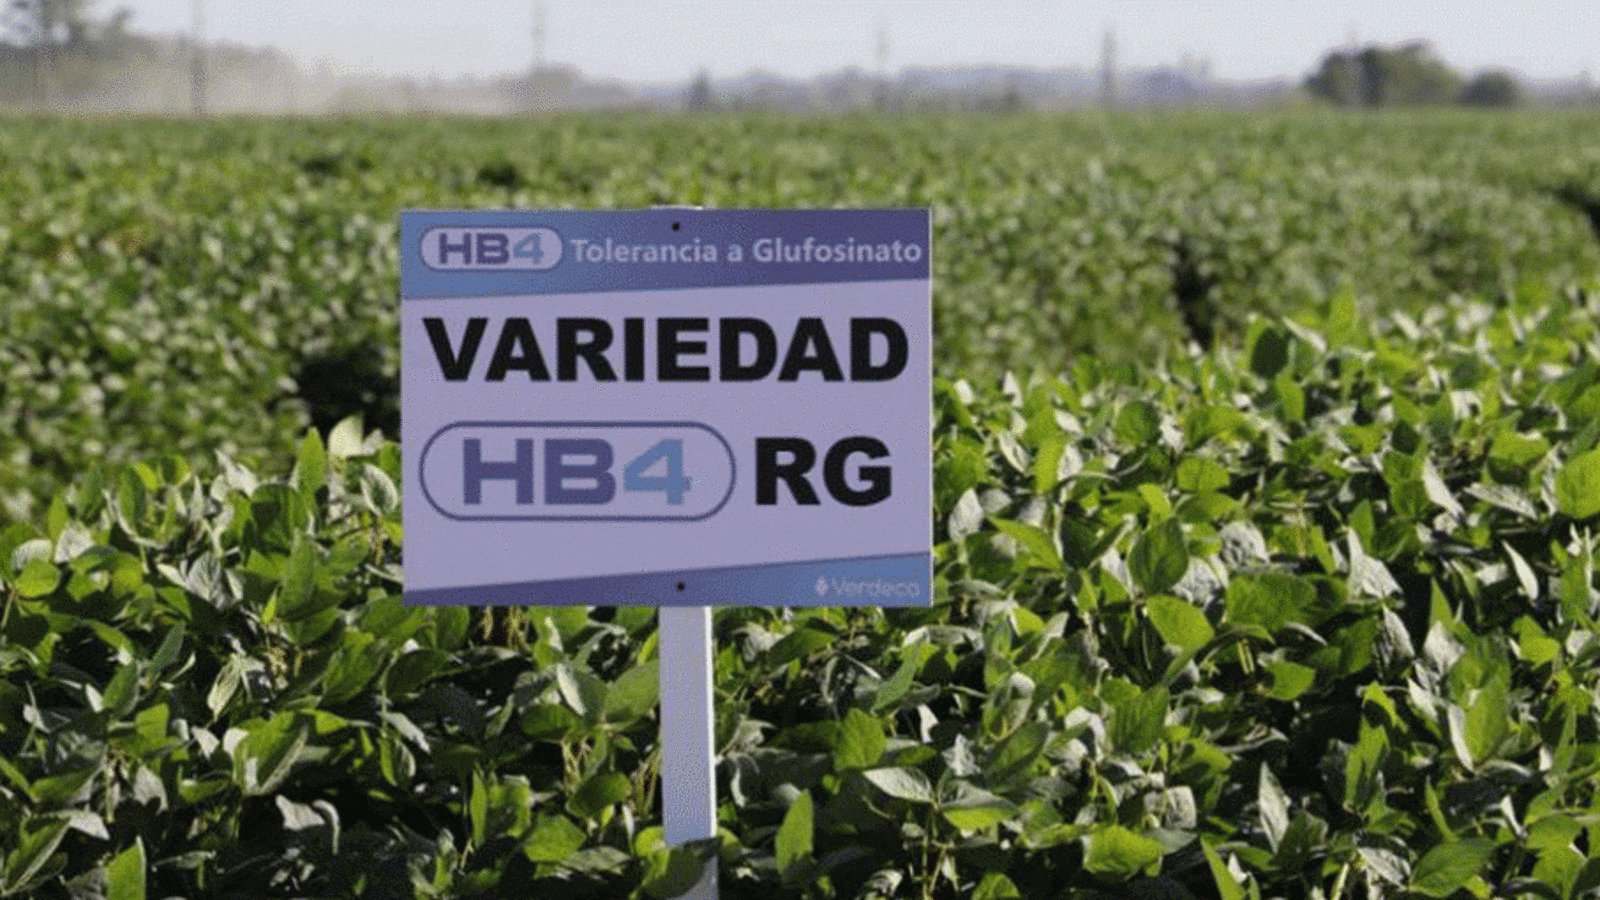 Bioceres Crop Solutions achieves full ownership of soybean biotech firm Verdeca